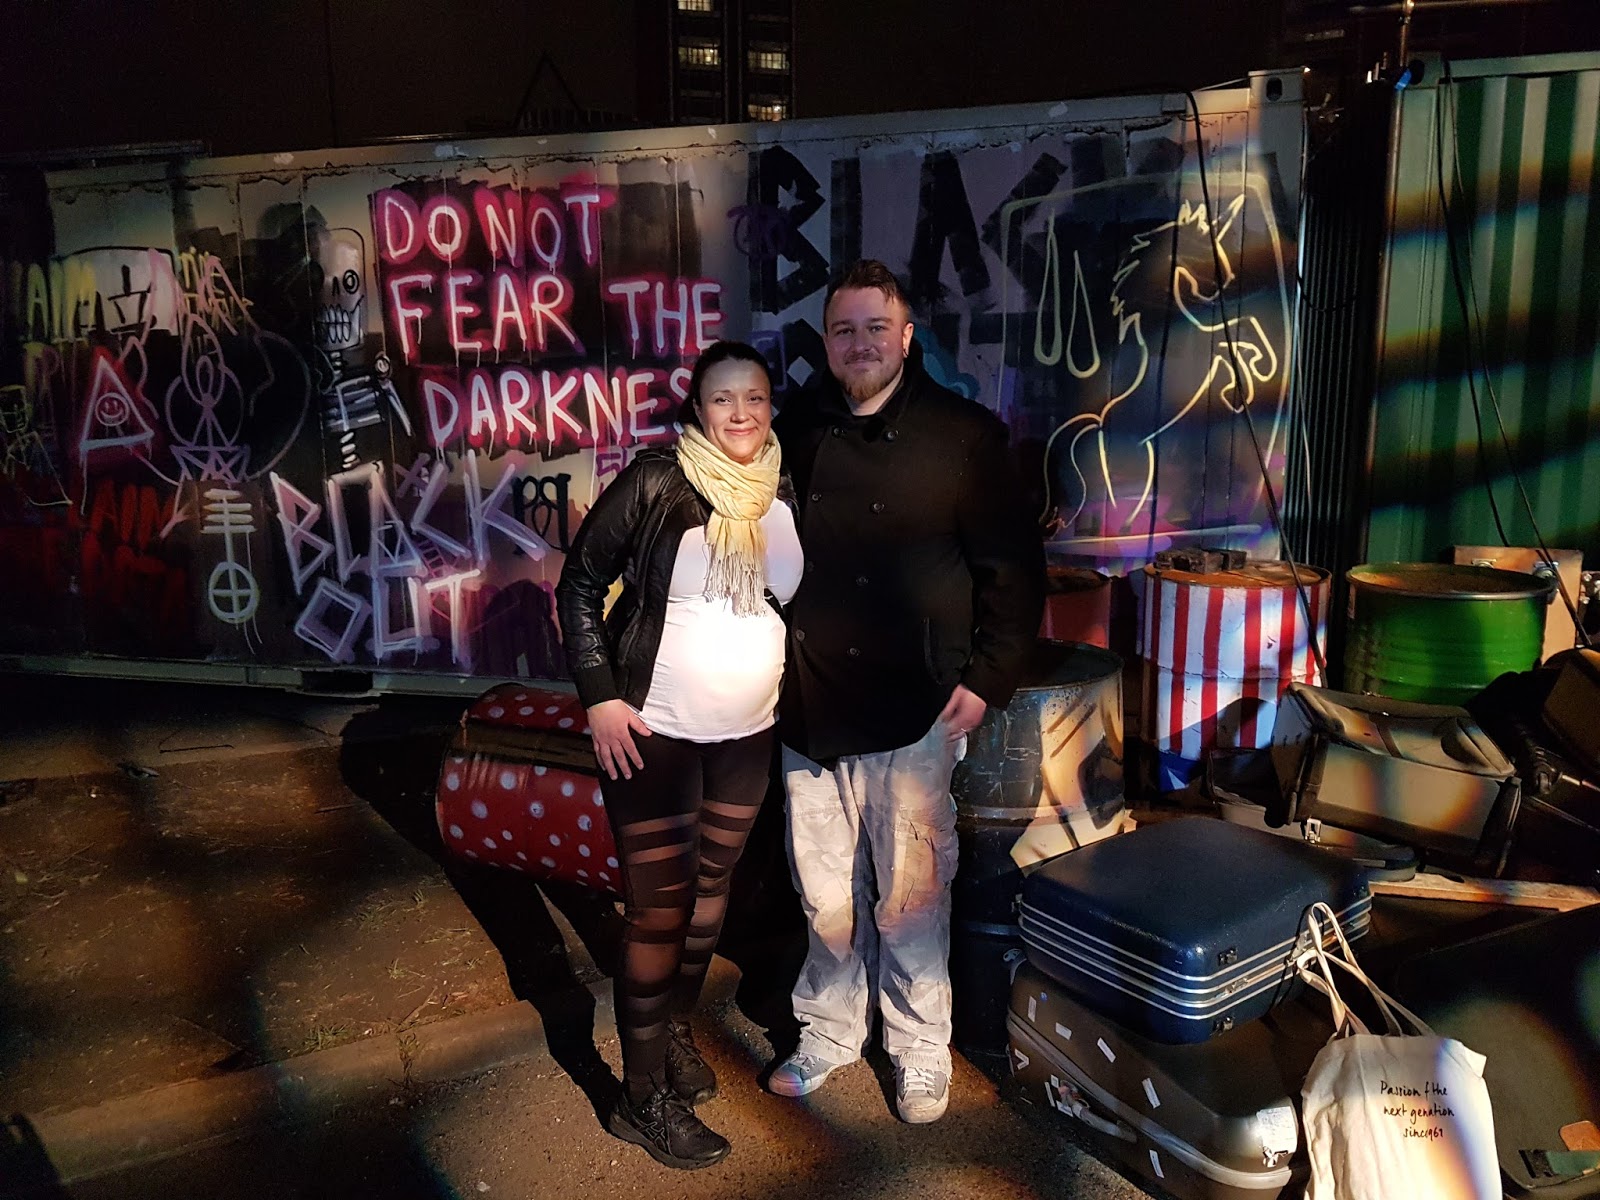 couple standing in front of graffiti